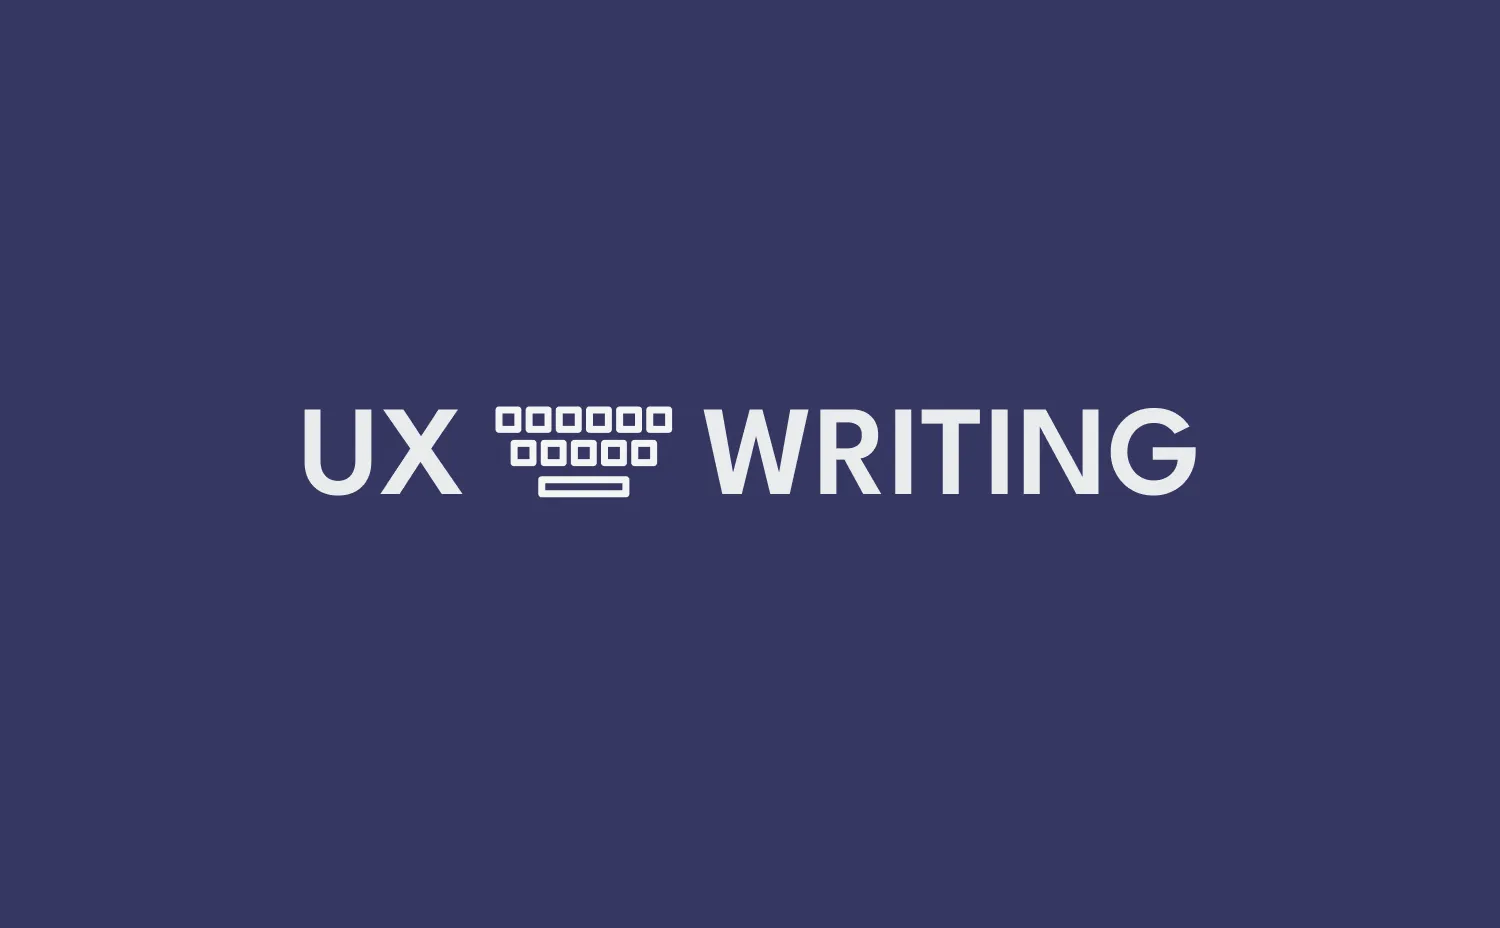 The ultimate UX writing guide to improve user experience.